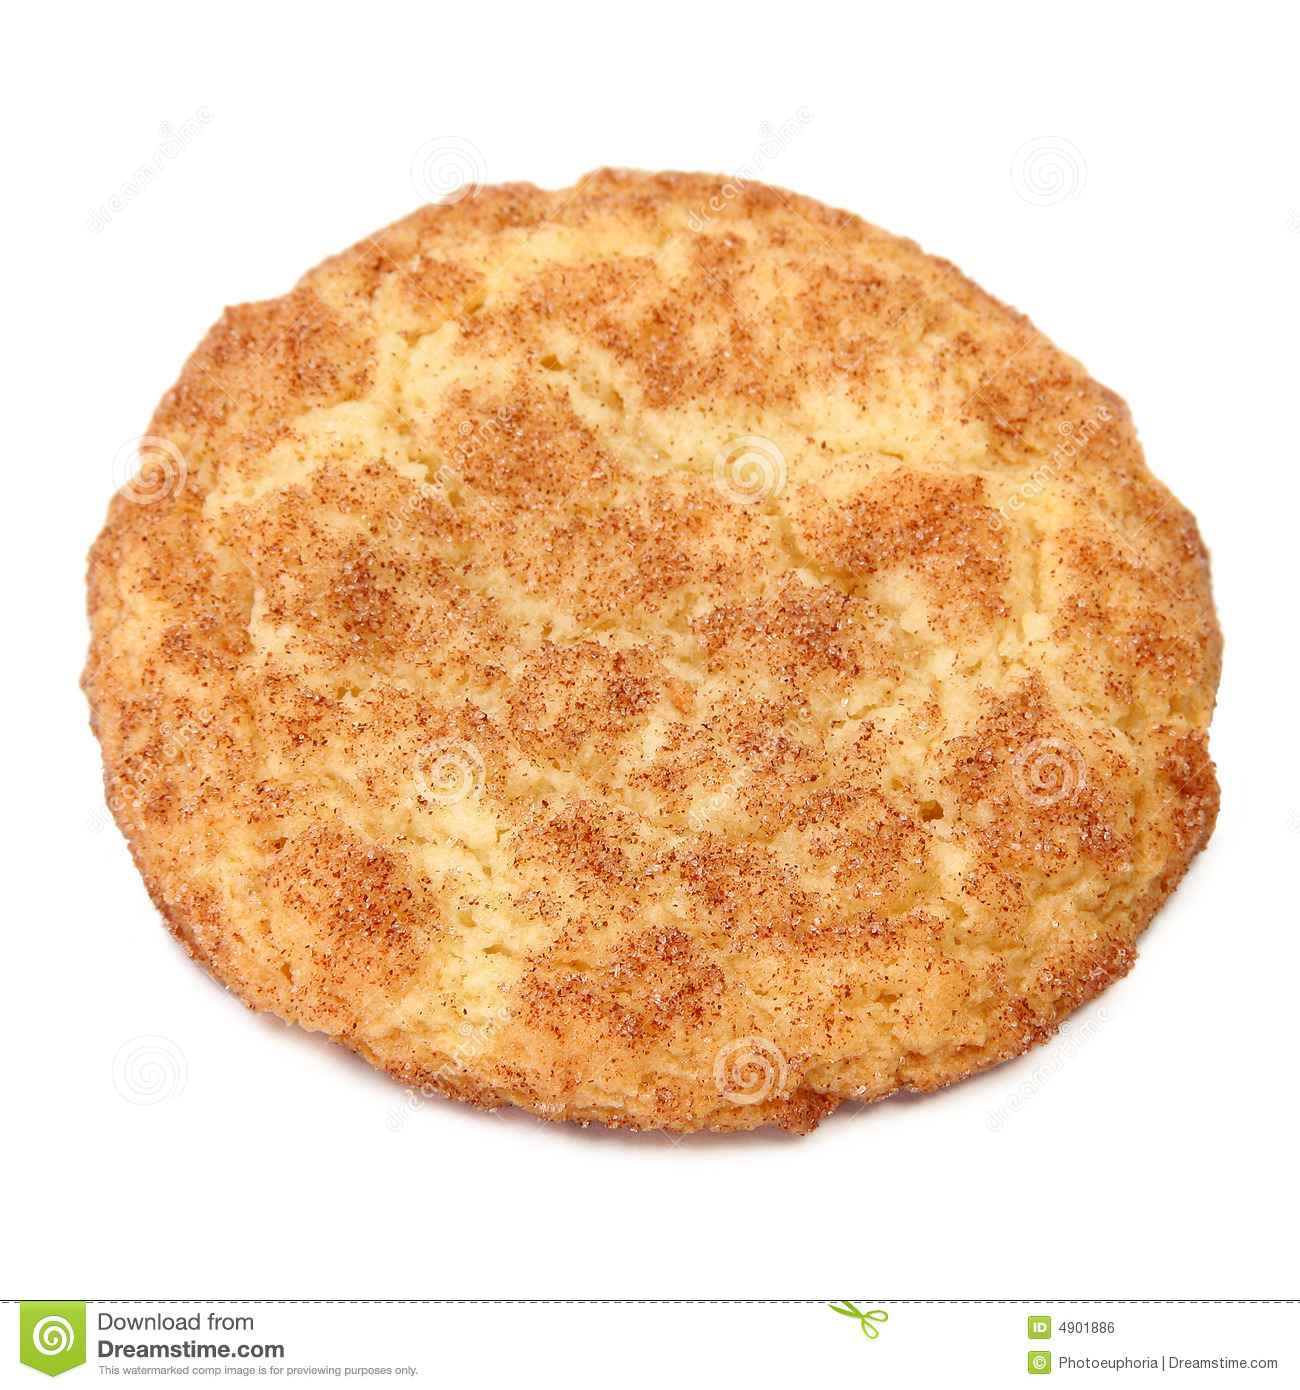 Snickerdoodle Royalty Free Stock Image   Image  4901886